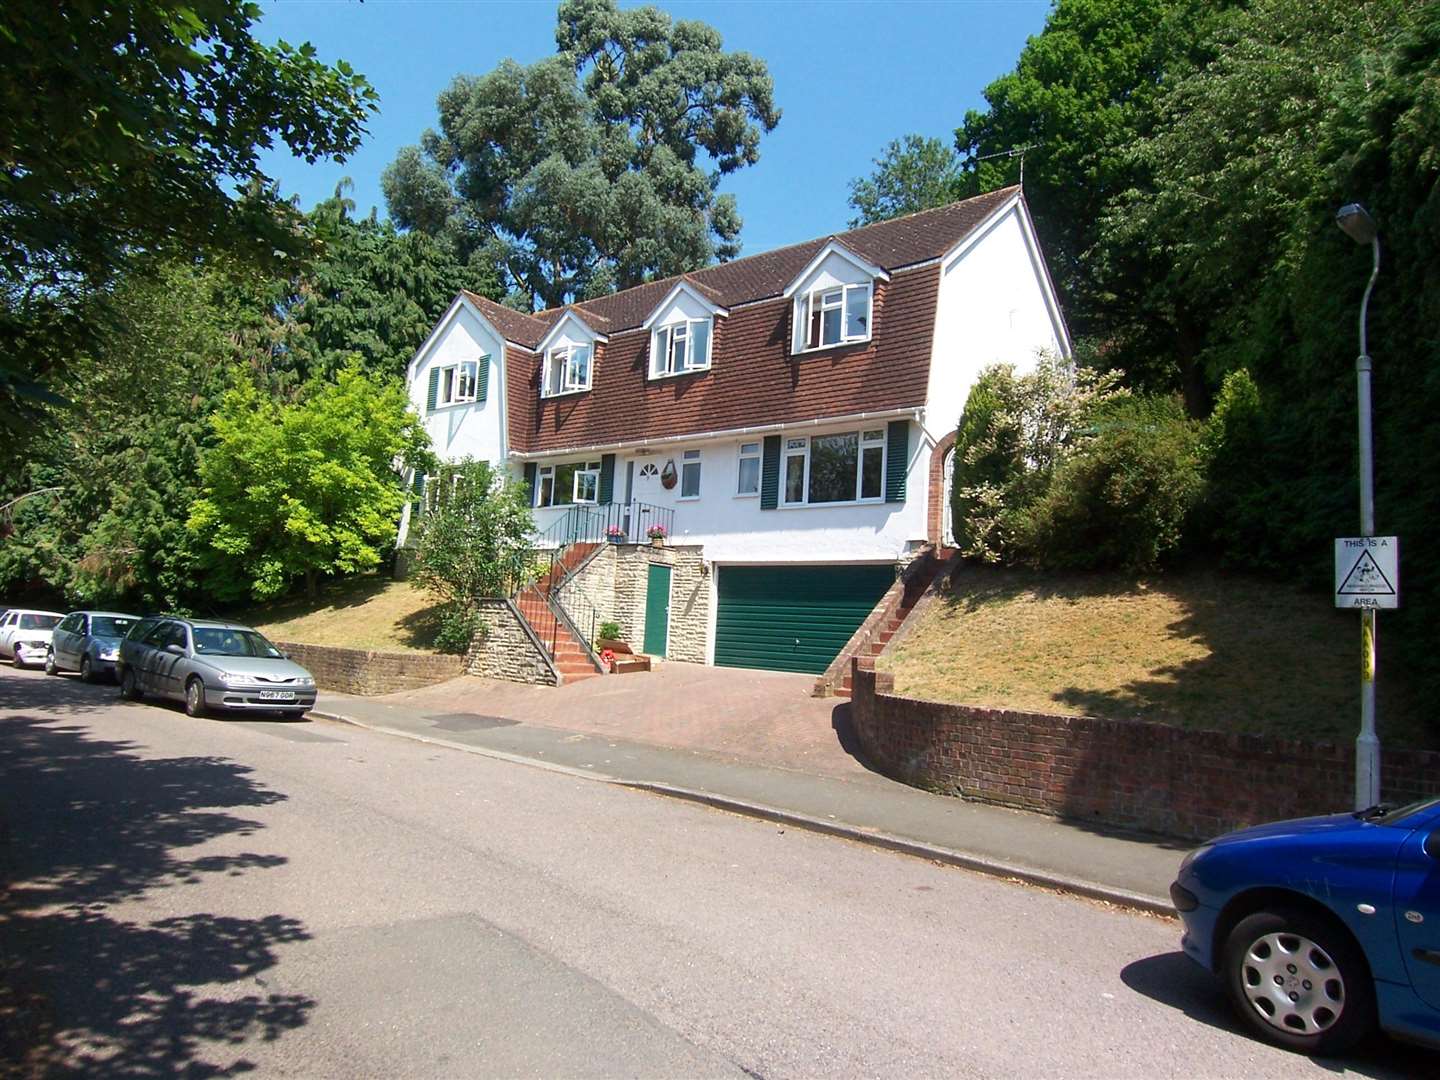 A lovely house in Valley Drive, Sevenoaks